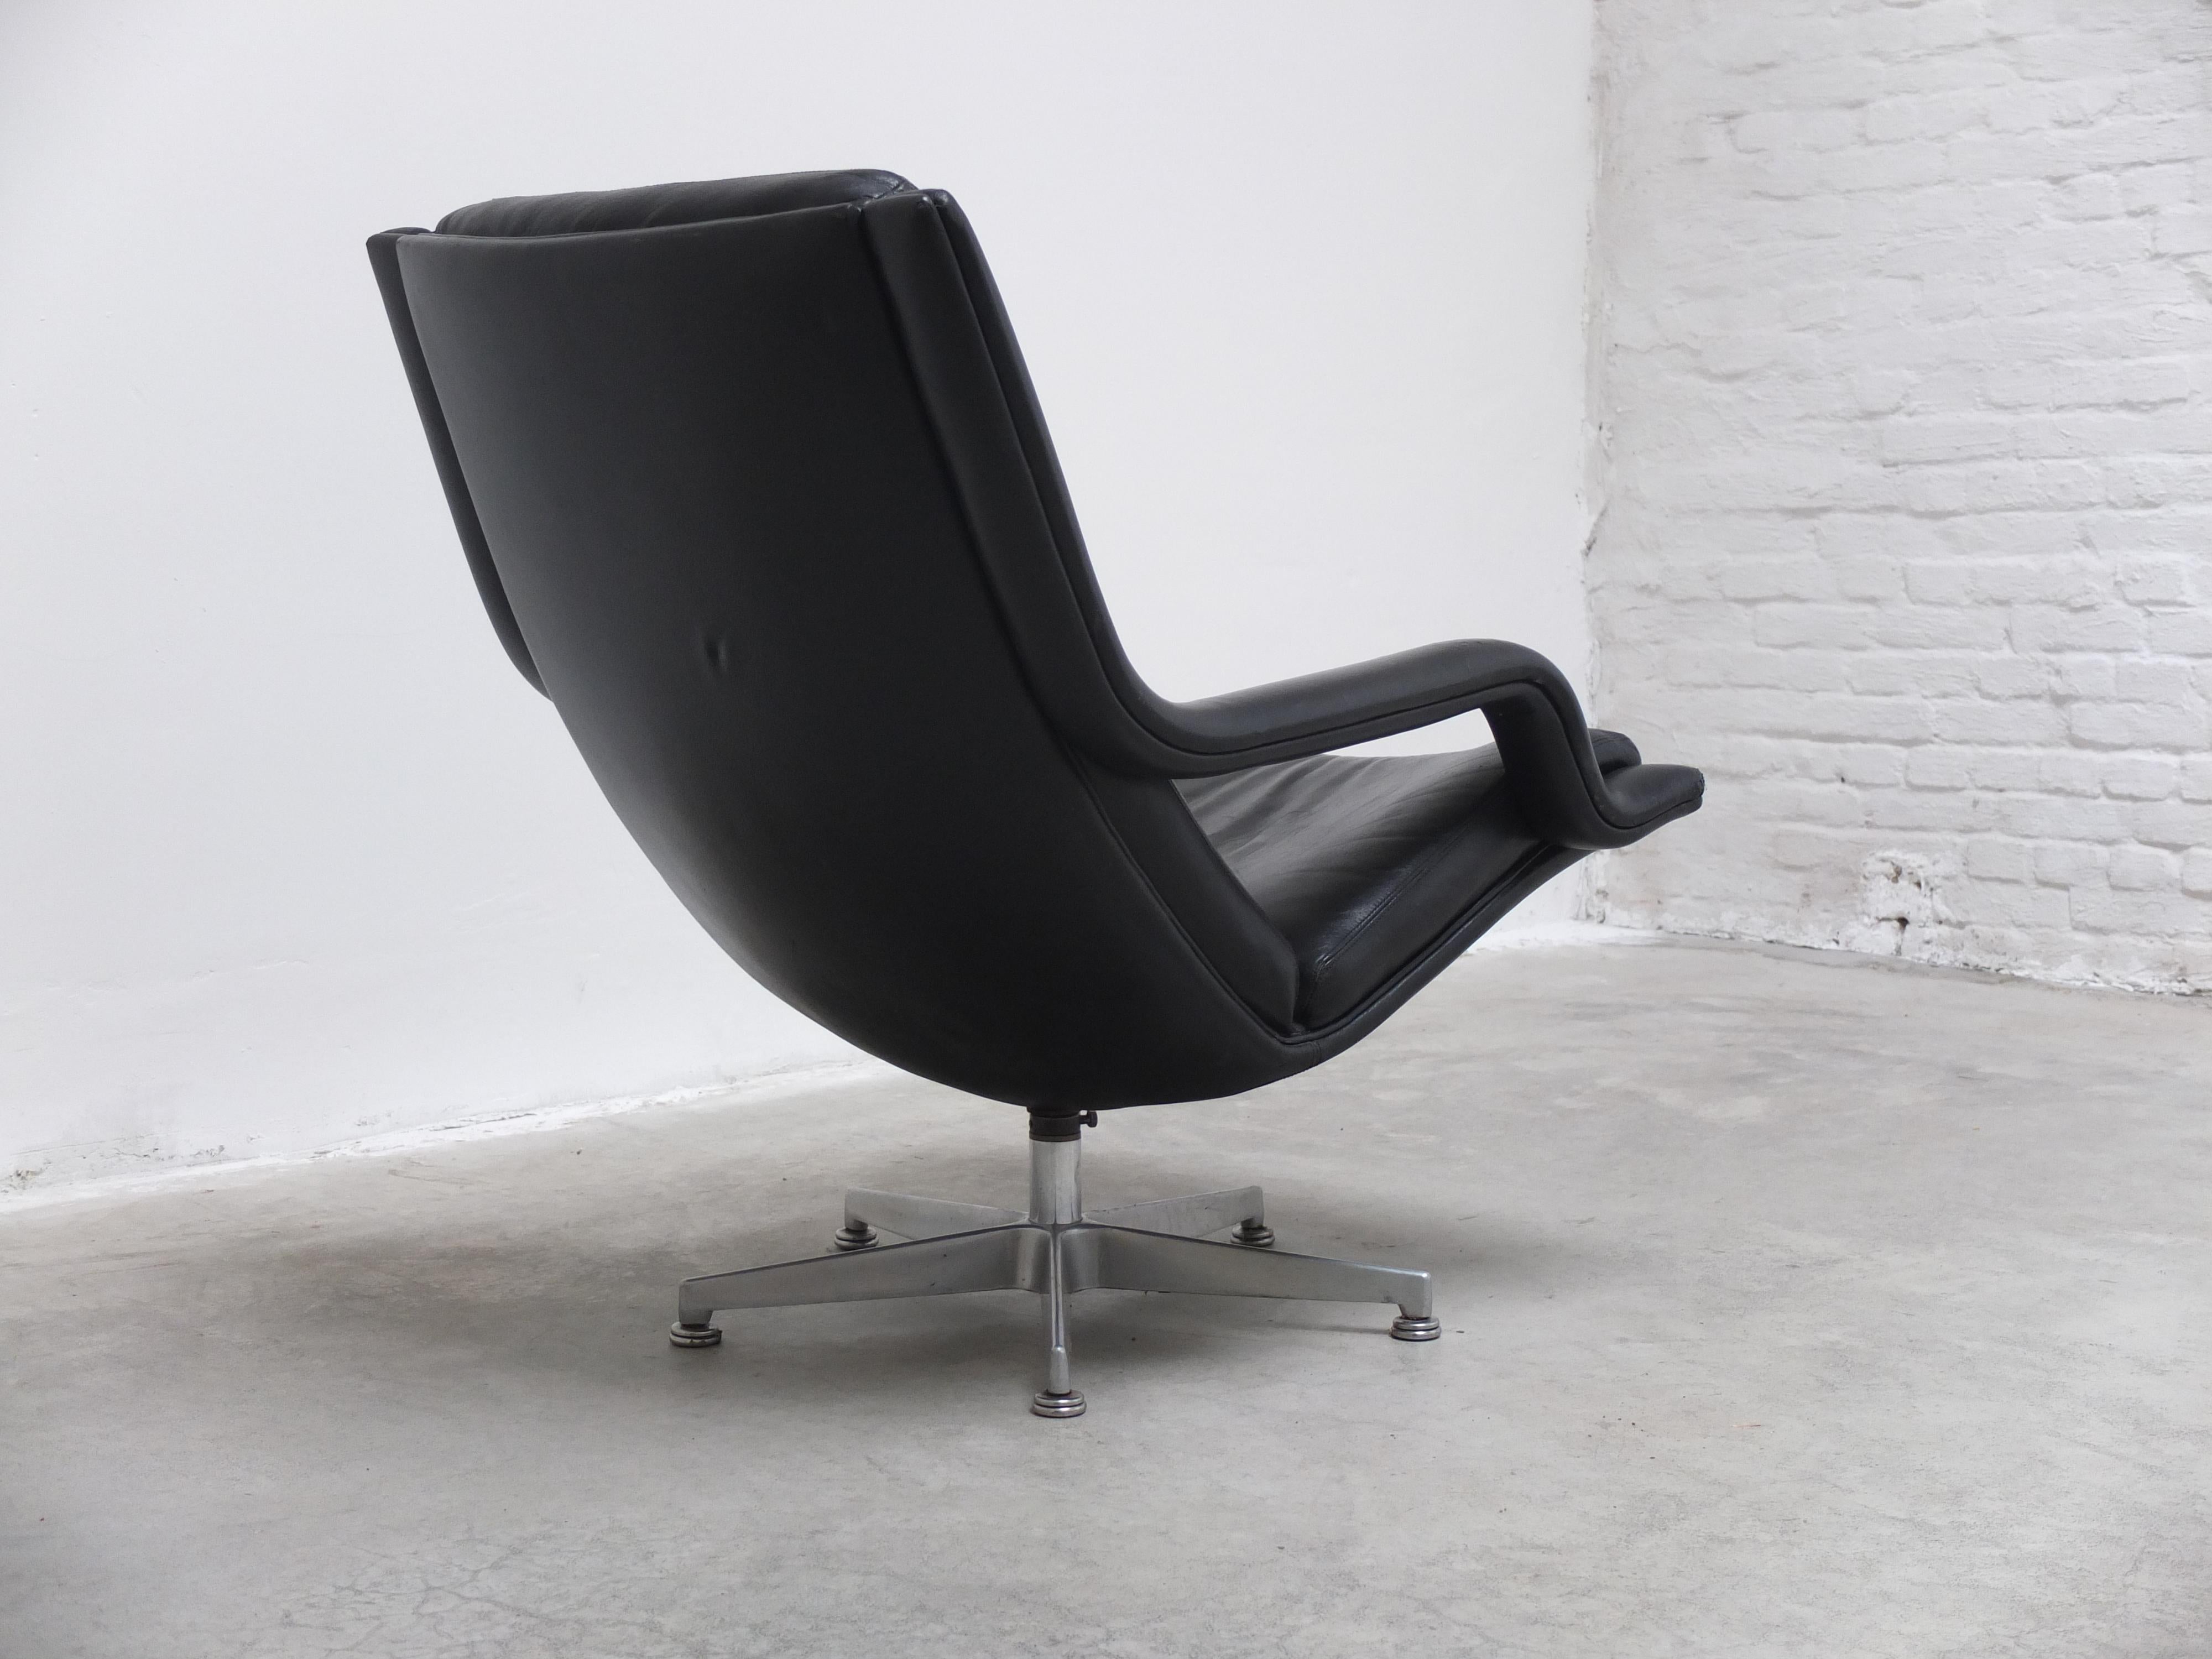 Leather 'F152' Swivel Lounge Chairs by Geoffrey Harcourt for Artifort, 1970s For Sale 2